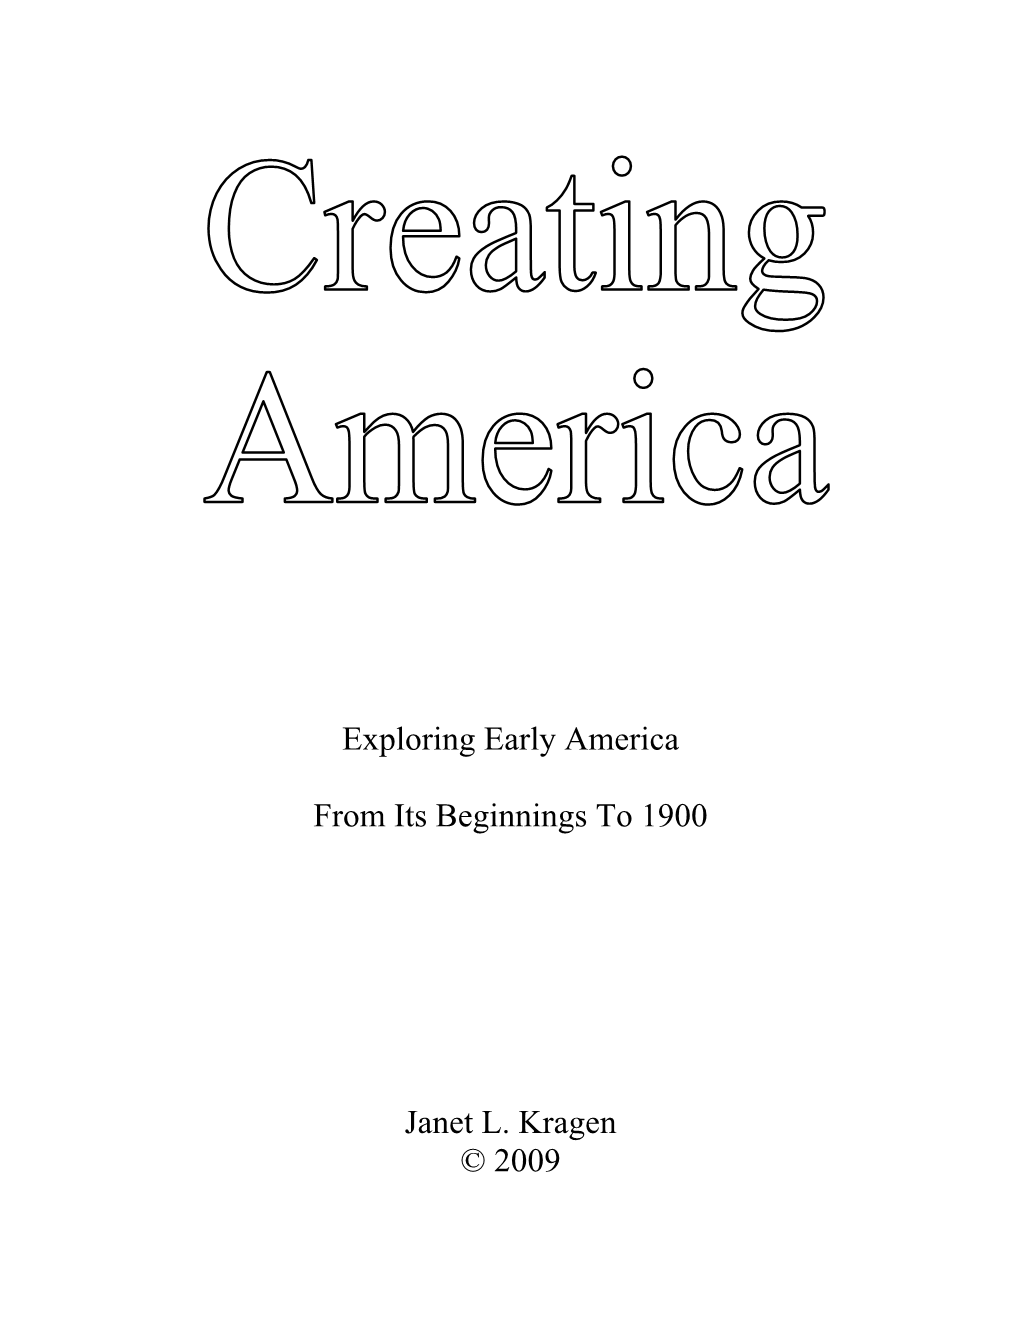 Creating America: Exploring Early America from Its Beginnings to 1900 Is a Companion Piece to My Previous Book Decade Days: Exploring the Twentieth Century in America